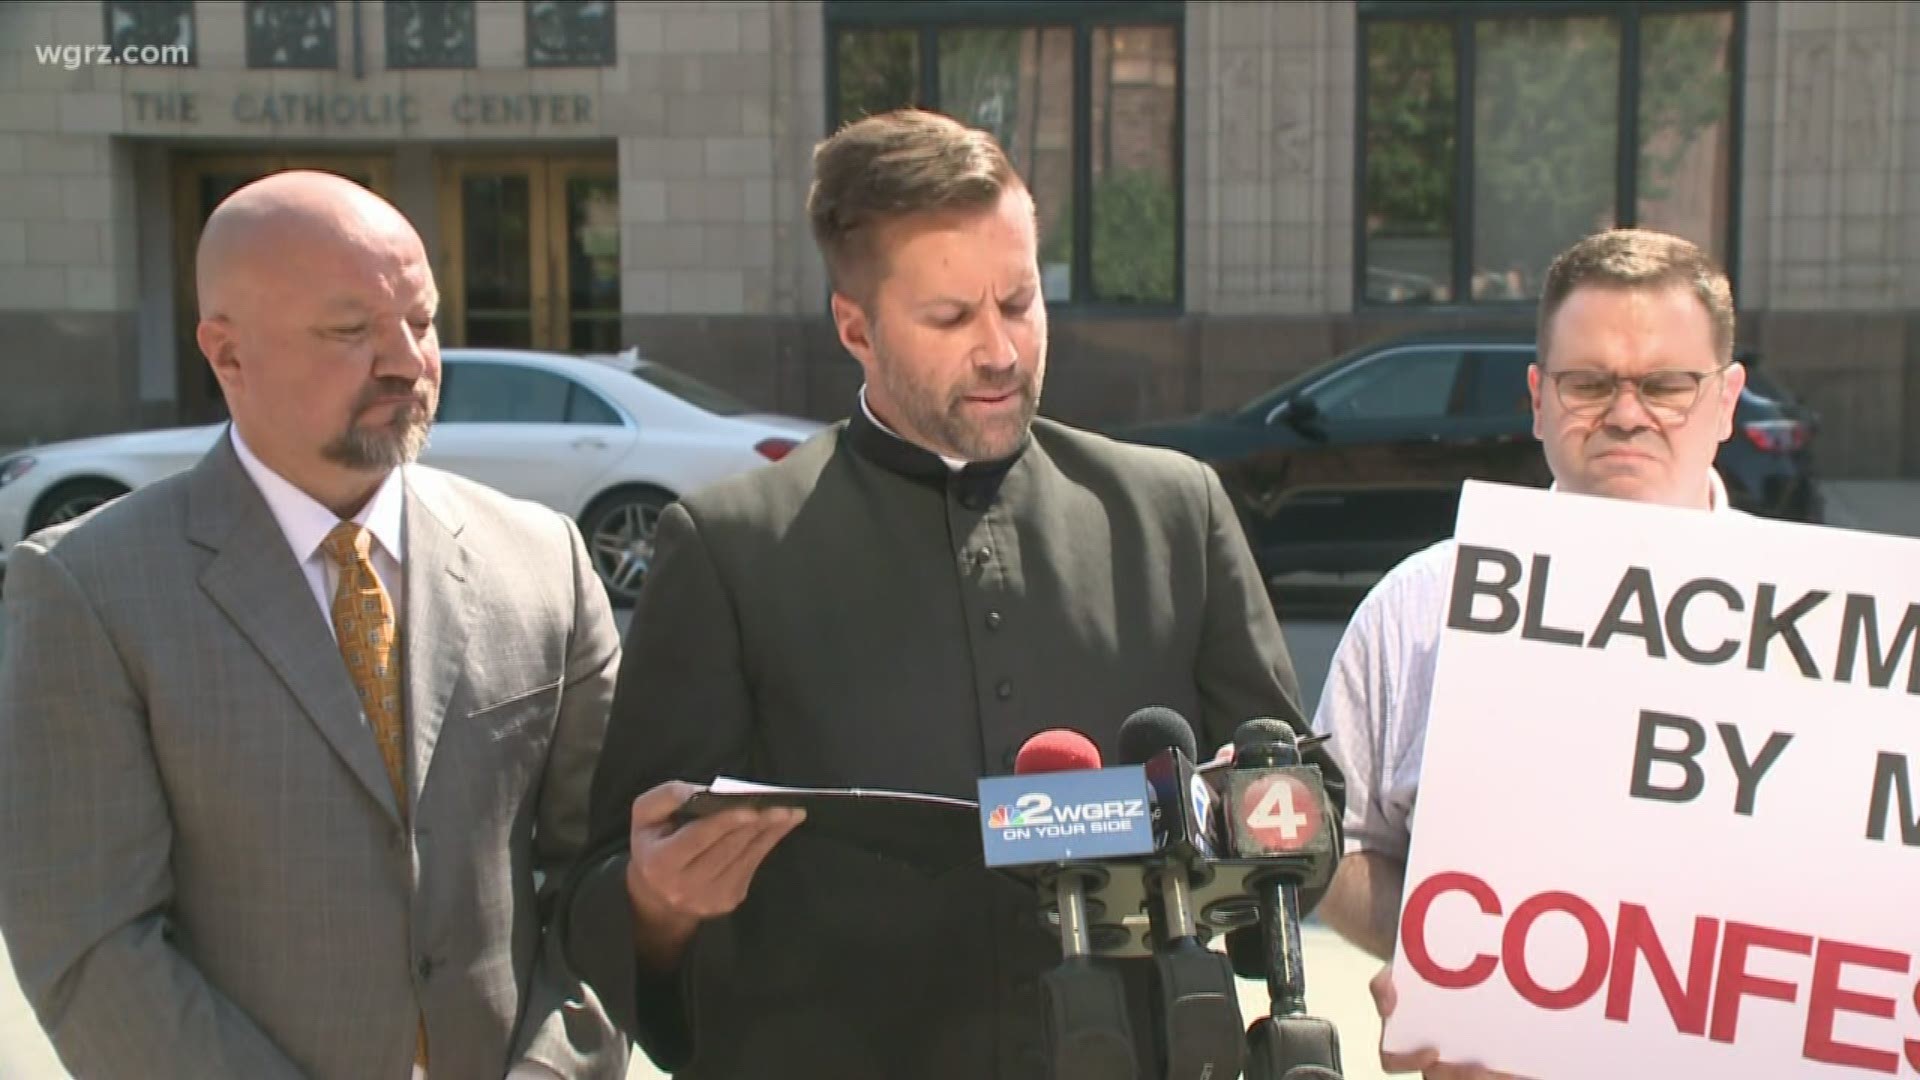 Bojanowski claimed he endured months of revenge and retaliation after rejecting the advances of Father Jeffrey Nowak.